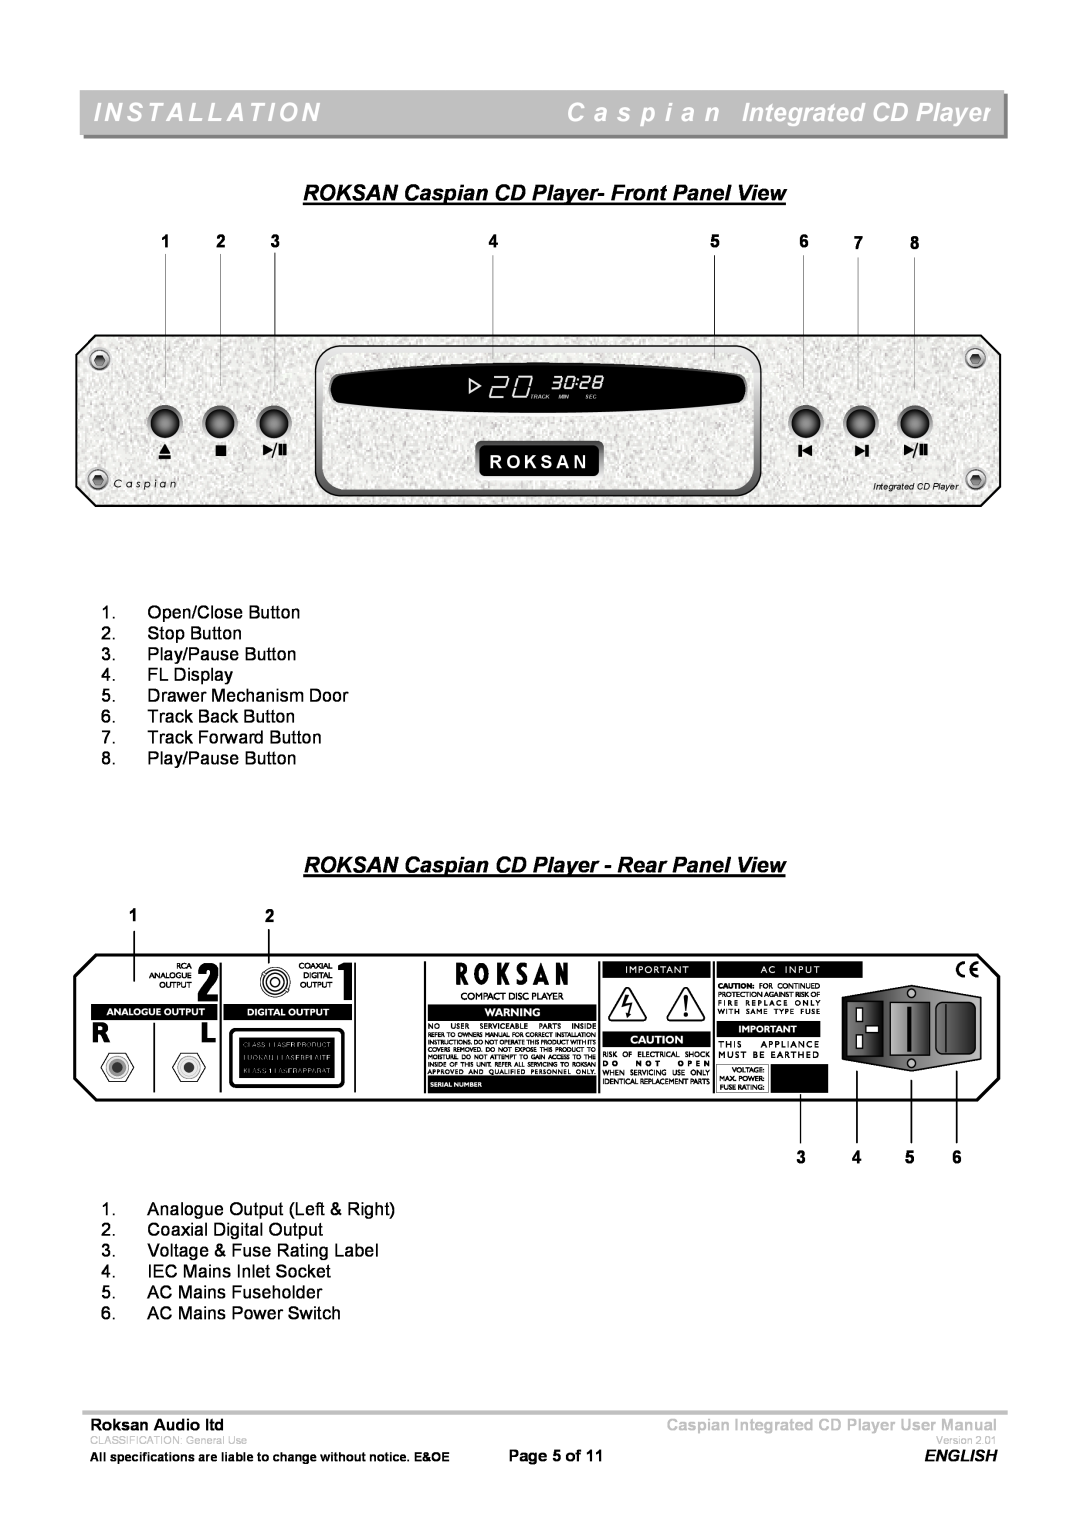 Roksan Audio INTEGRATED CD PLAYER user manual Installation, C a s p i a n Integrated CD Player, R O K S A N 